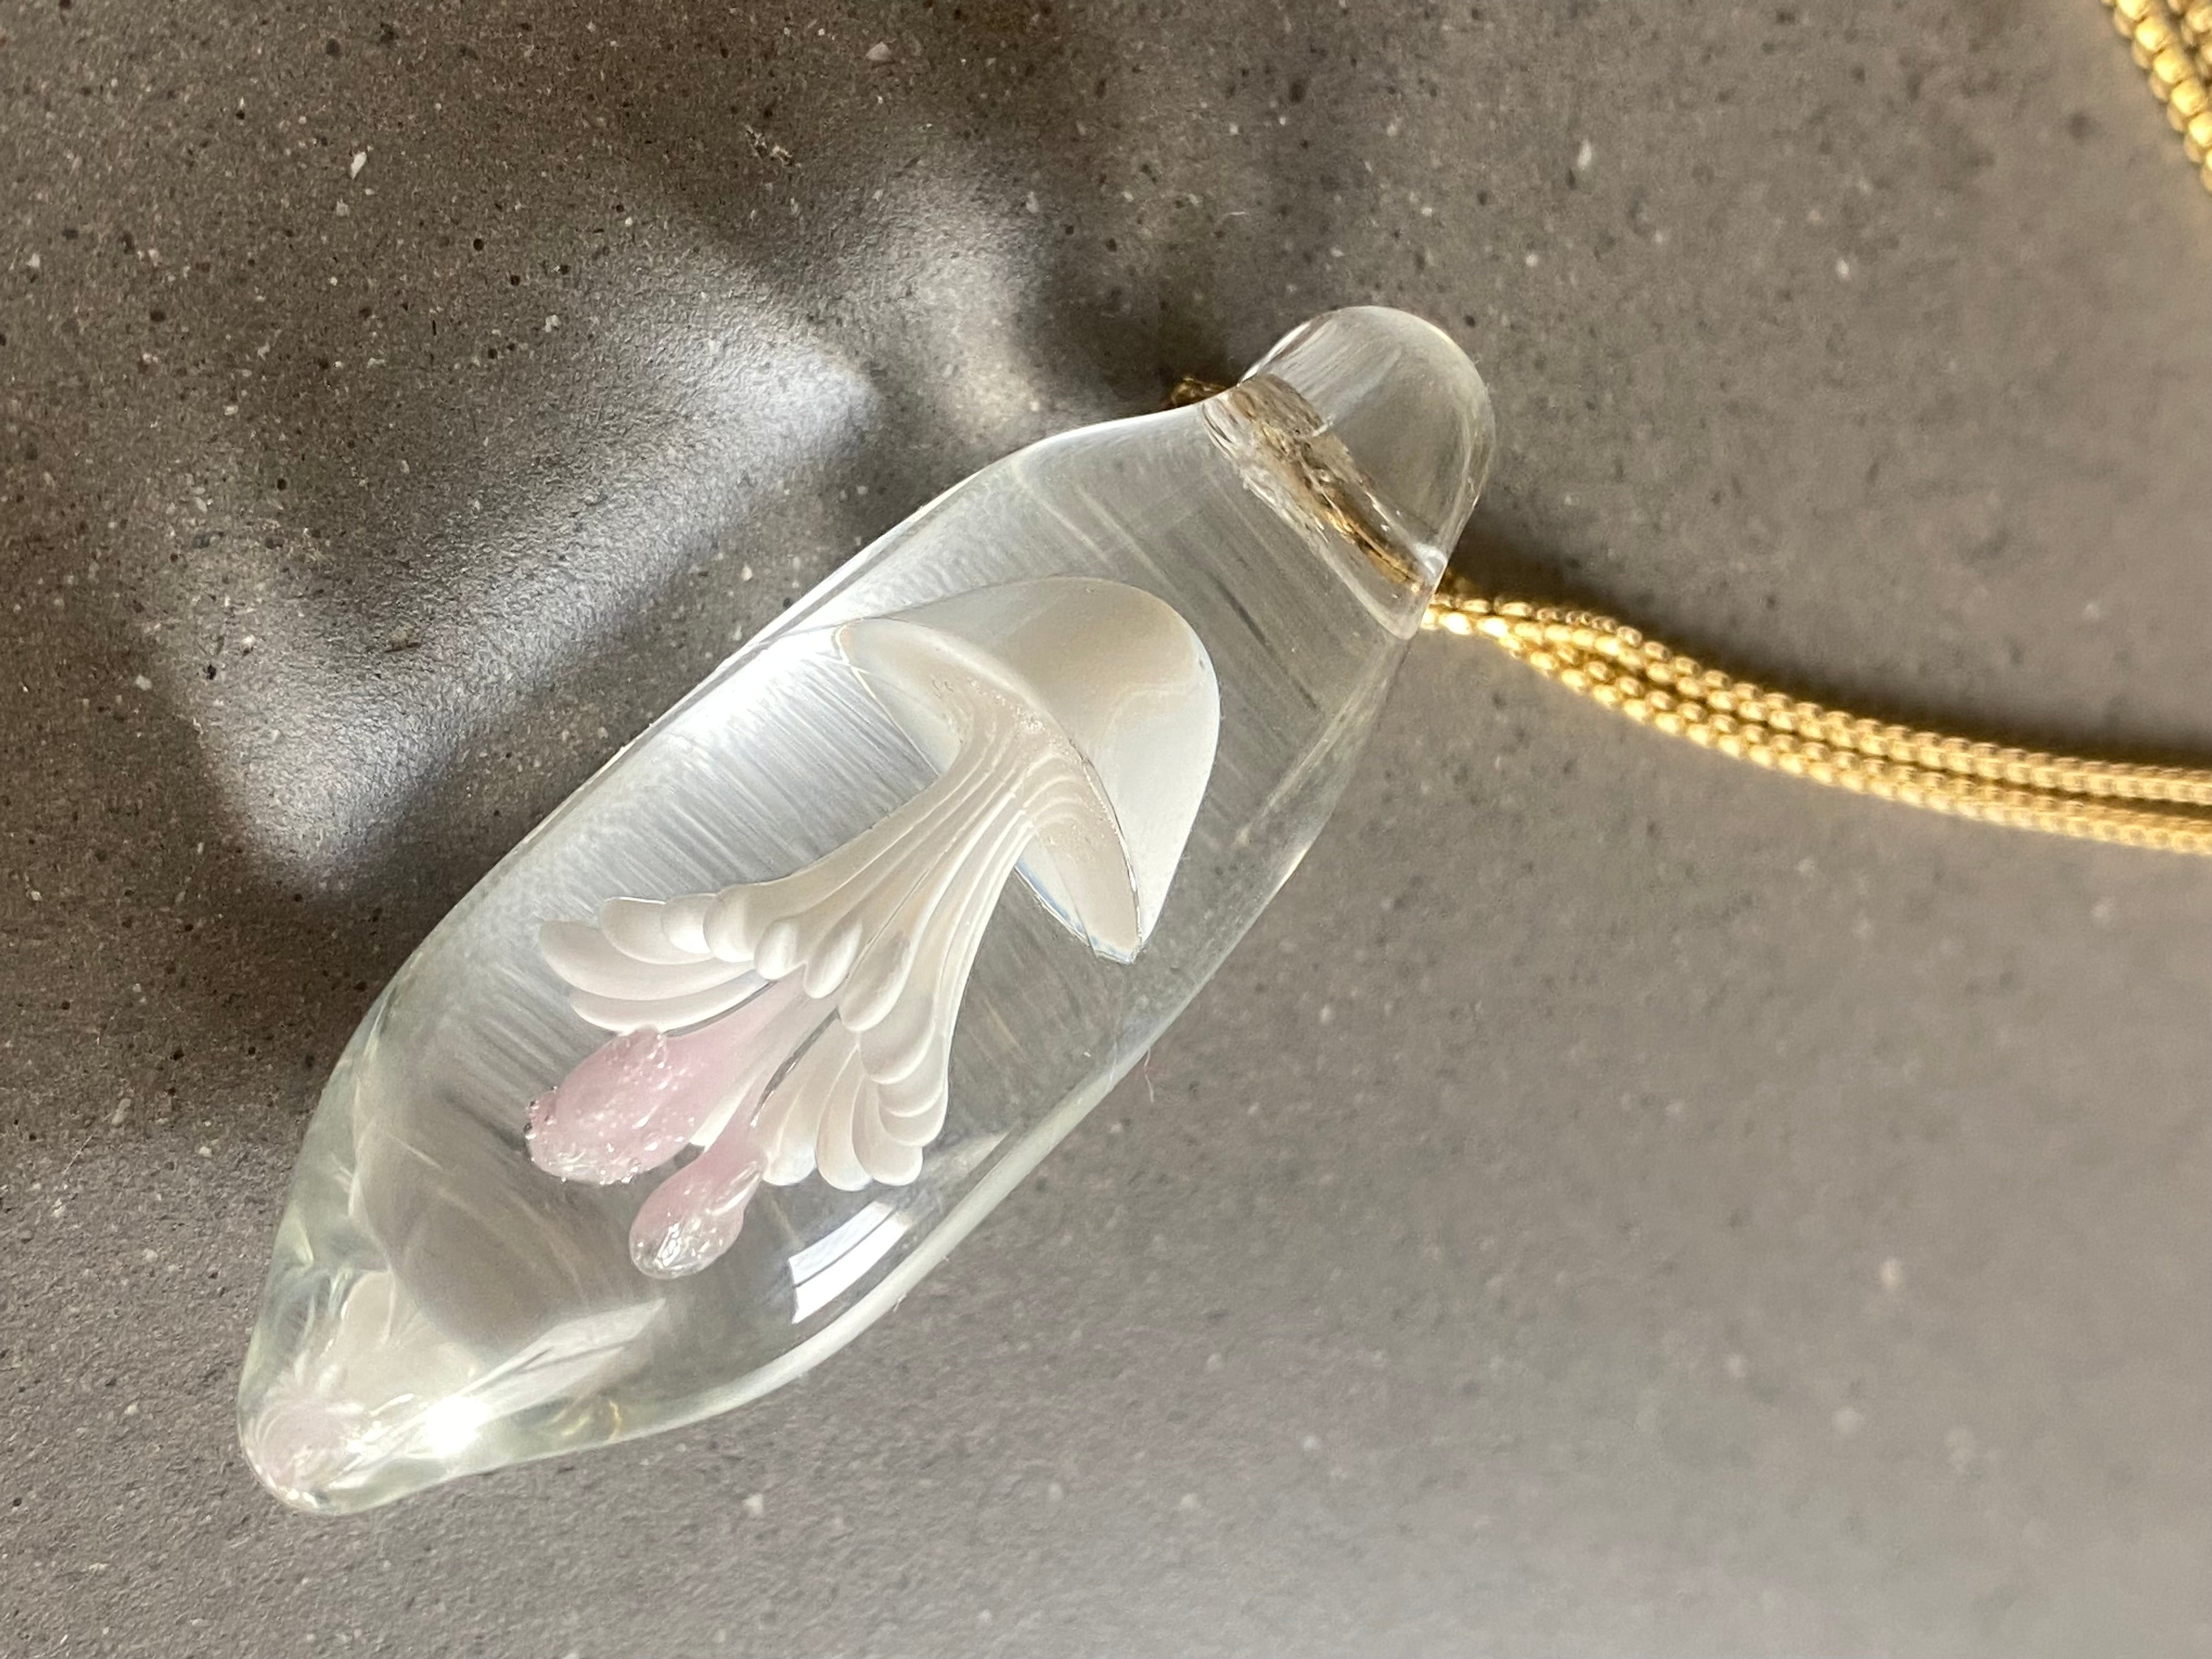 Pink and White Jellyfish Pendant